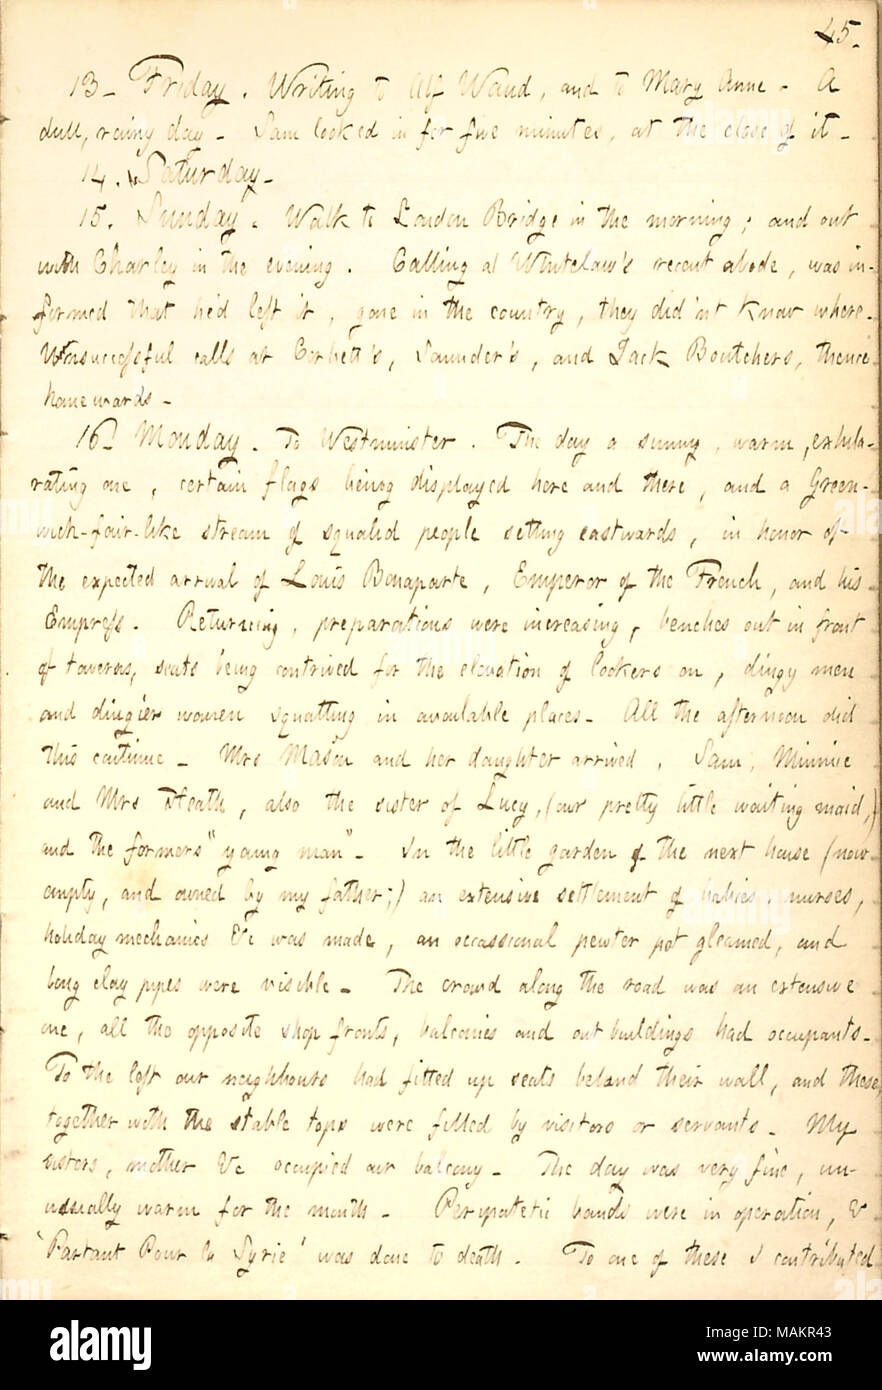 Describes attending a procession for Louis Napoleon in London.  Transcription: 13. Friday. Writing to Alf Waud, and to Mary Anne  [Greatbatch]. A dull, rainy day. Sam [Gunn] looked in for five minutes